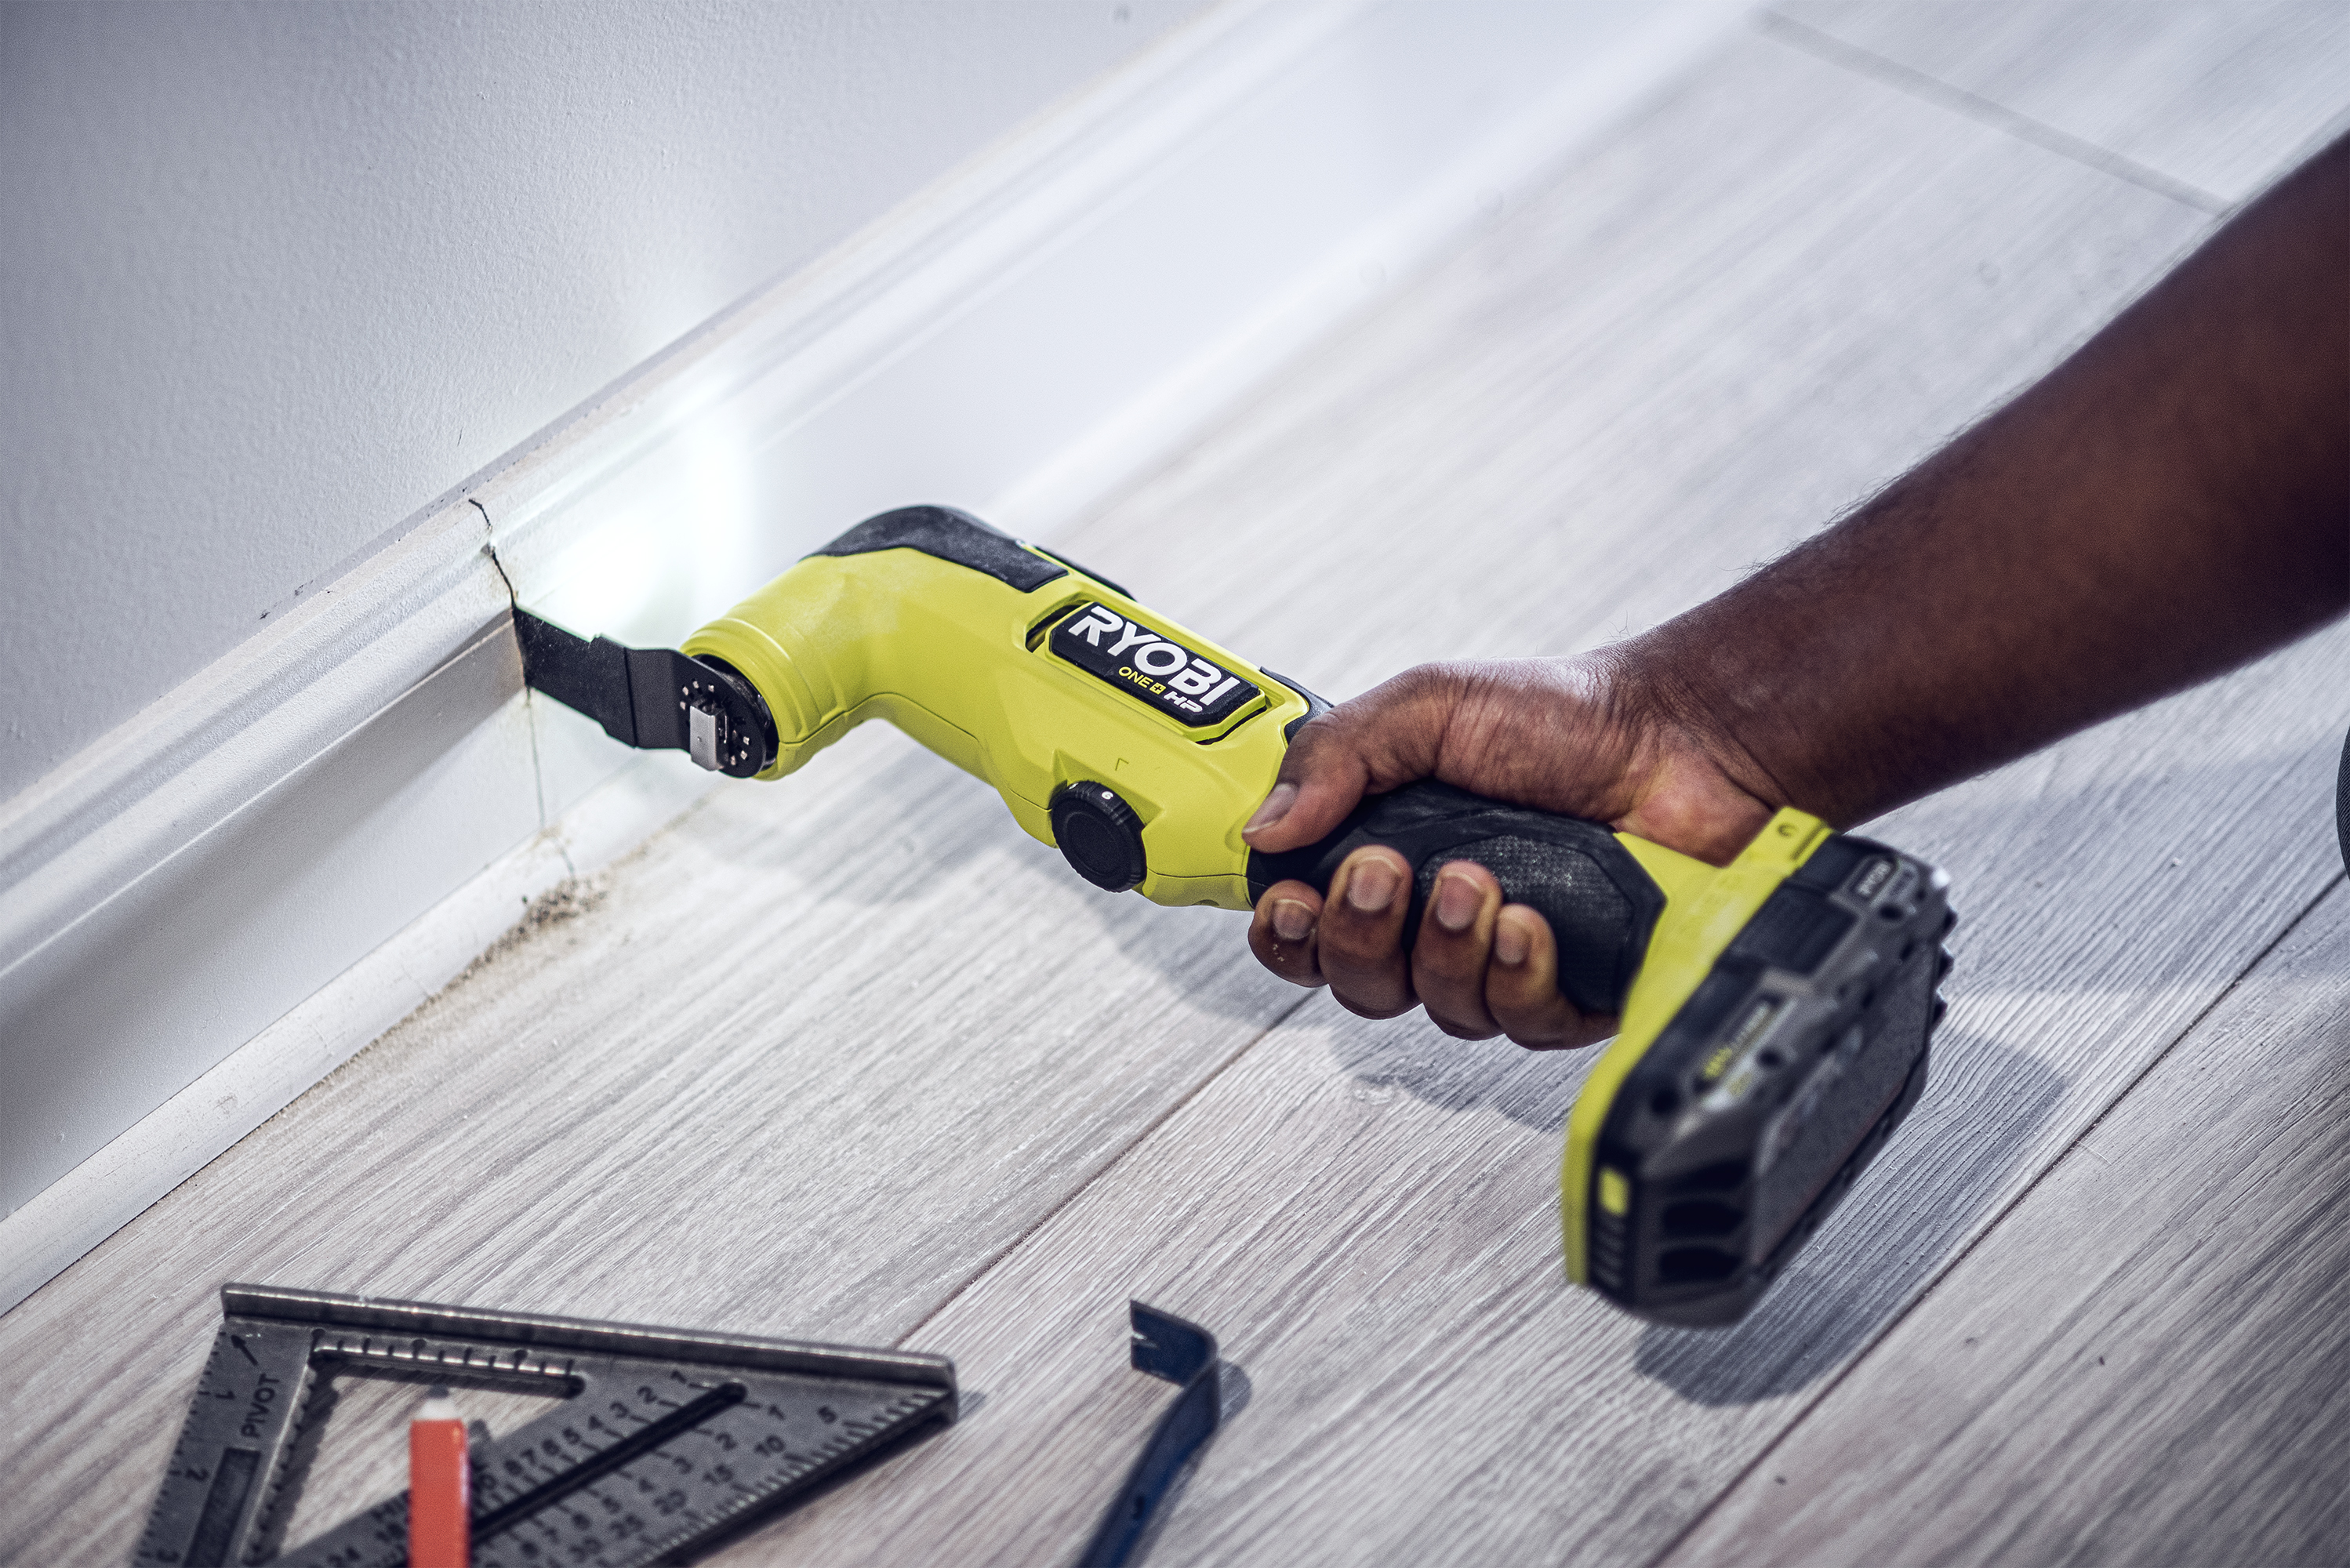 Ryobi's Compact Lithium Rotary Tool Offers Precise Power - Today's Homeowner